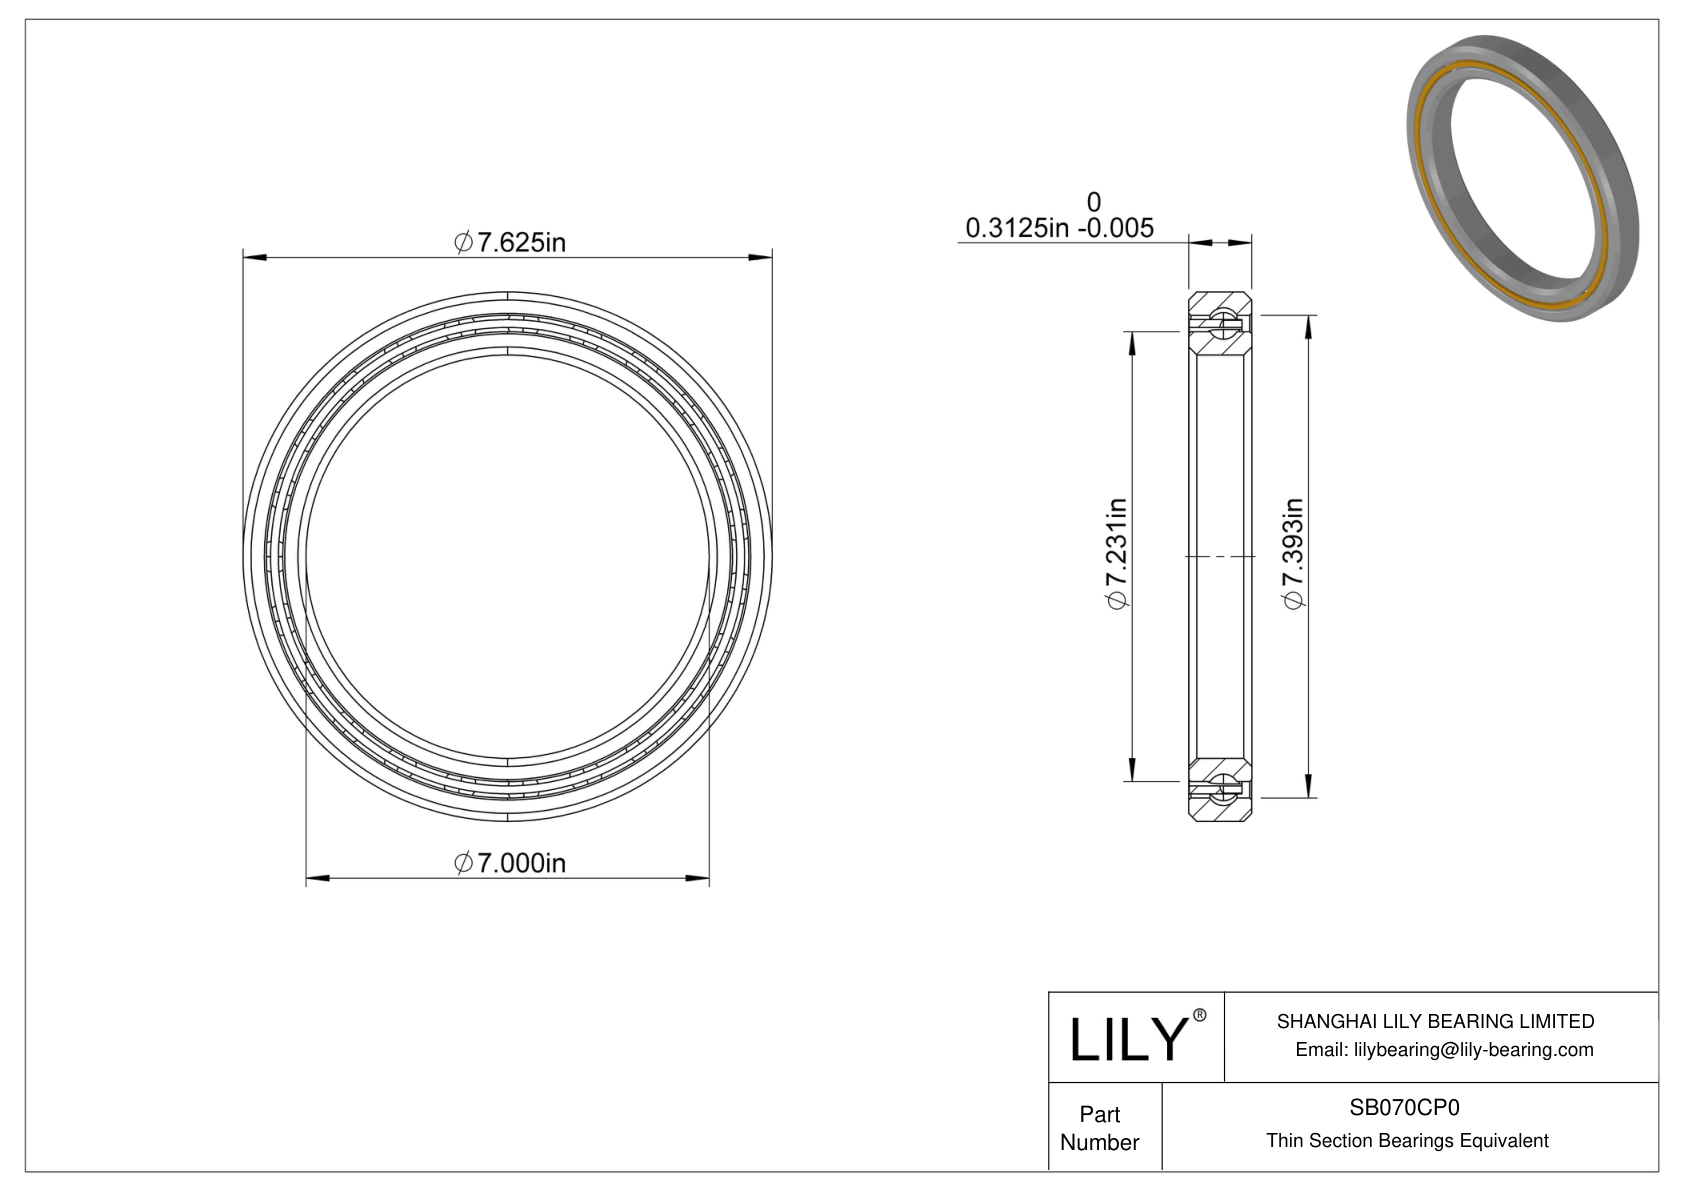 SB070CP0 Constant Section (CS) Bearings cad drawing